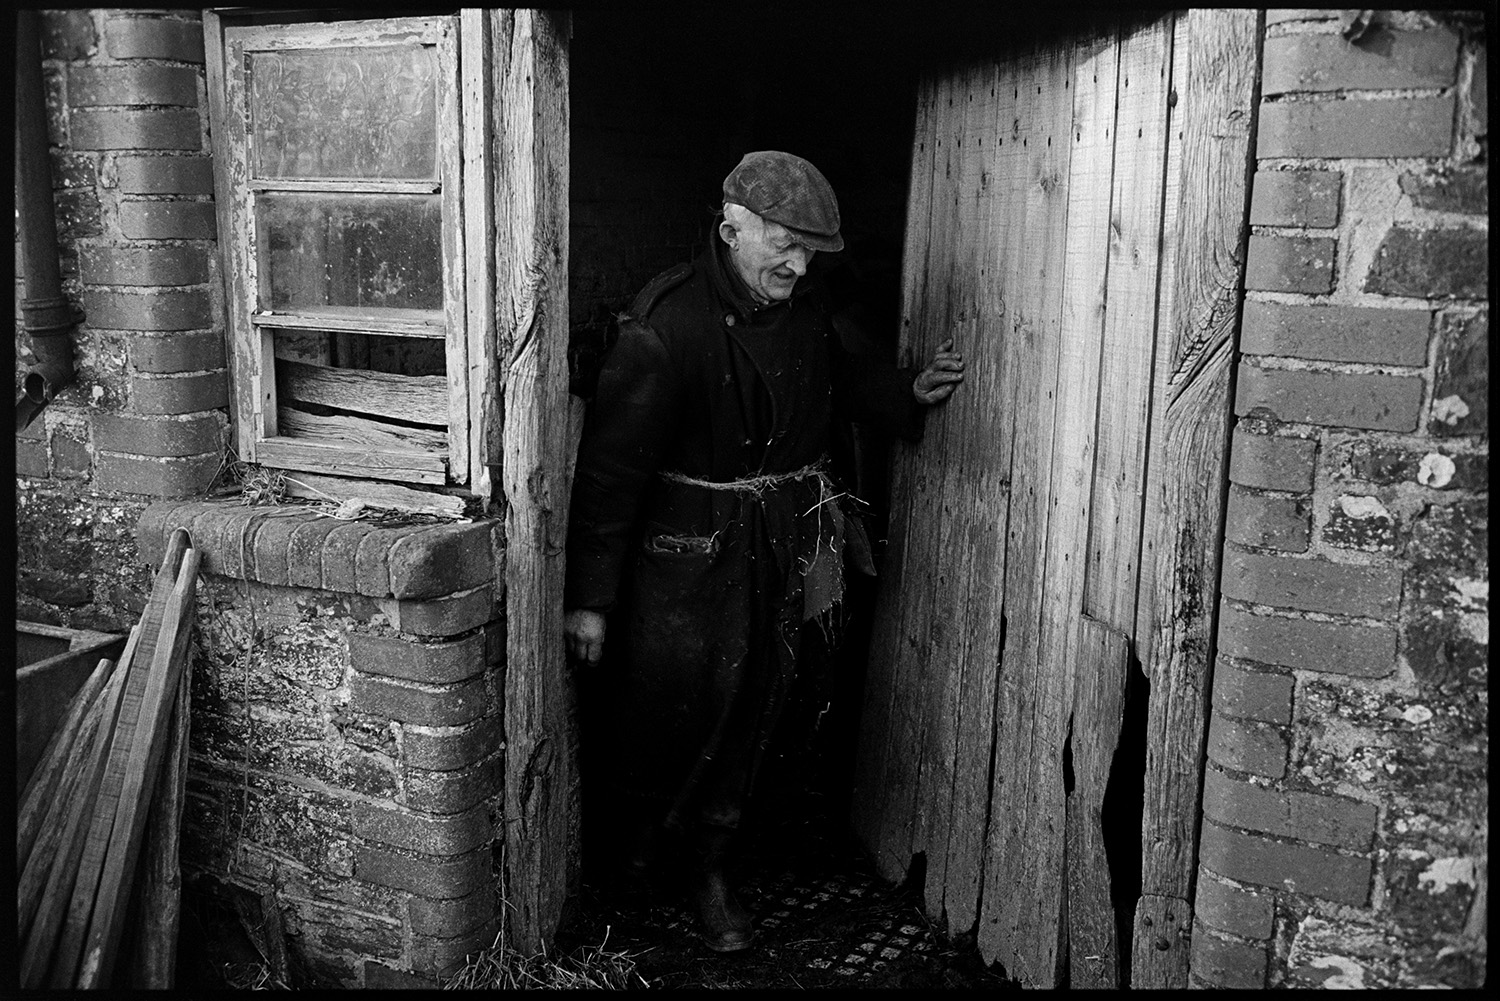 Farmer feeding calves and talking to me! Coat tied with string.
[Gordon Sanders, wearing a coat with a twine belt, coming out of a building with a wooden door at Reynards Park, Ashreigney.]